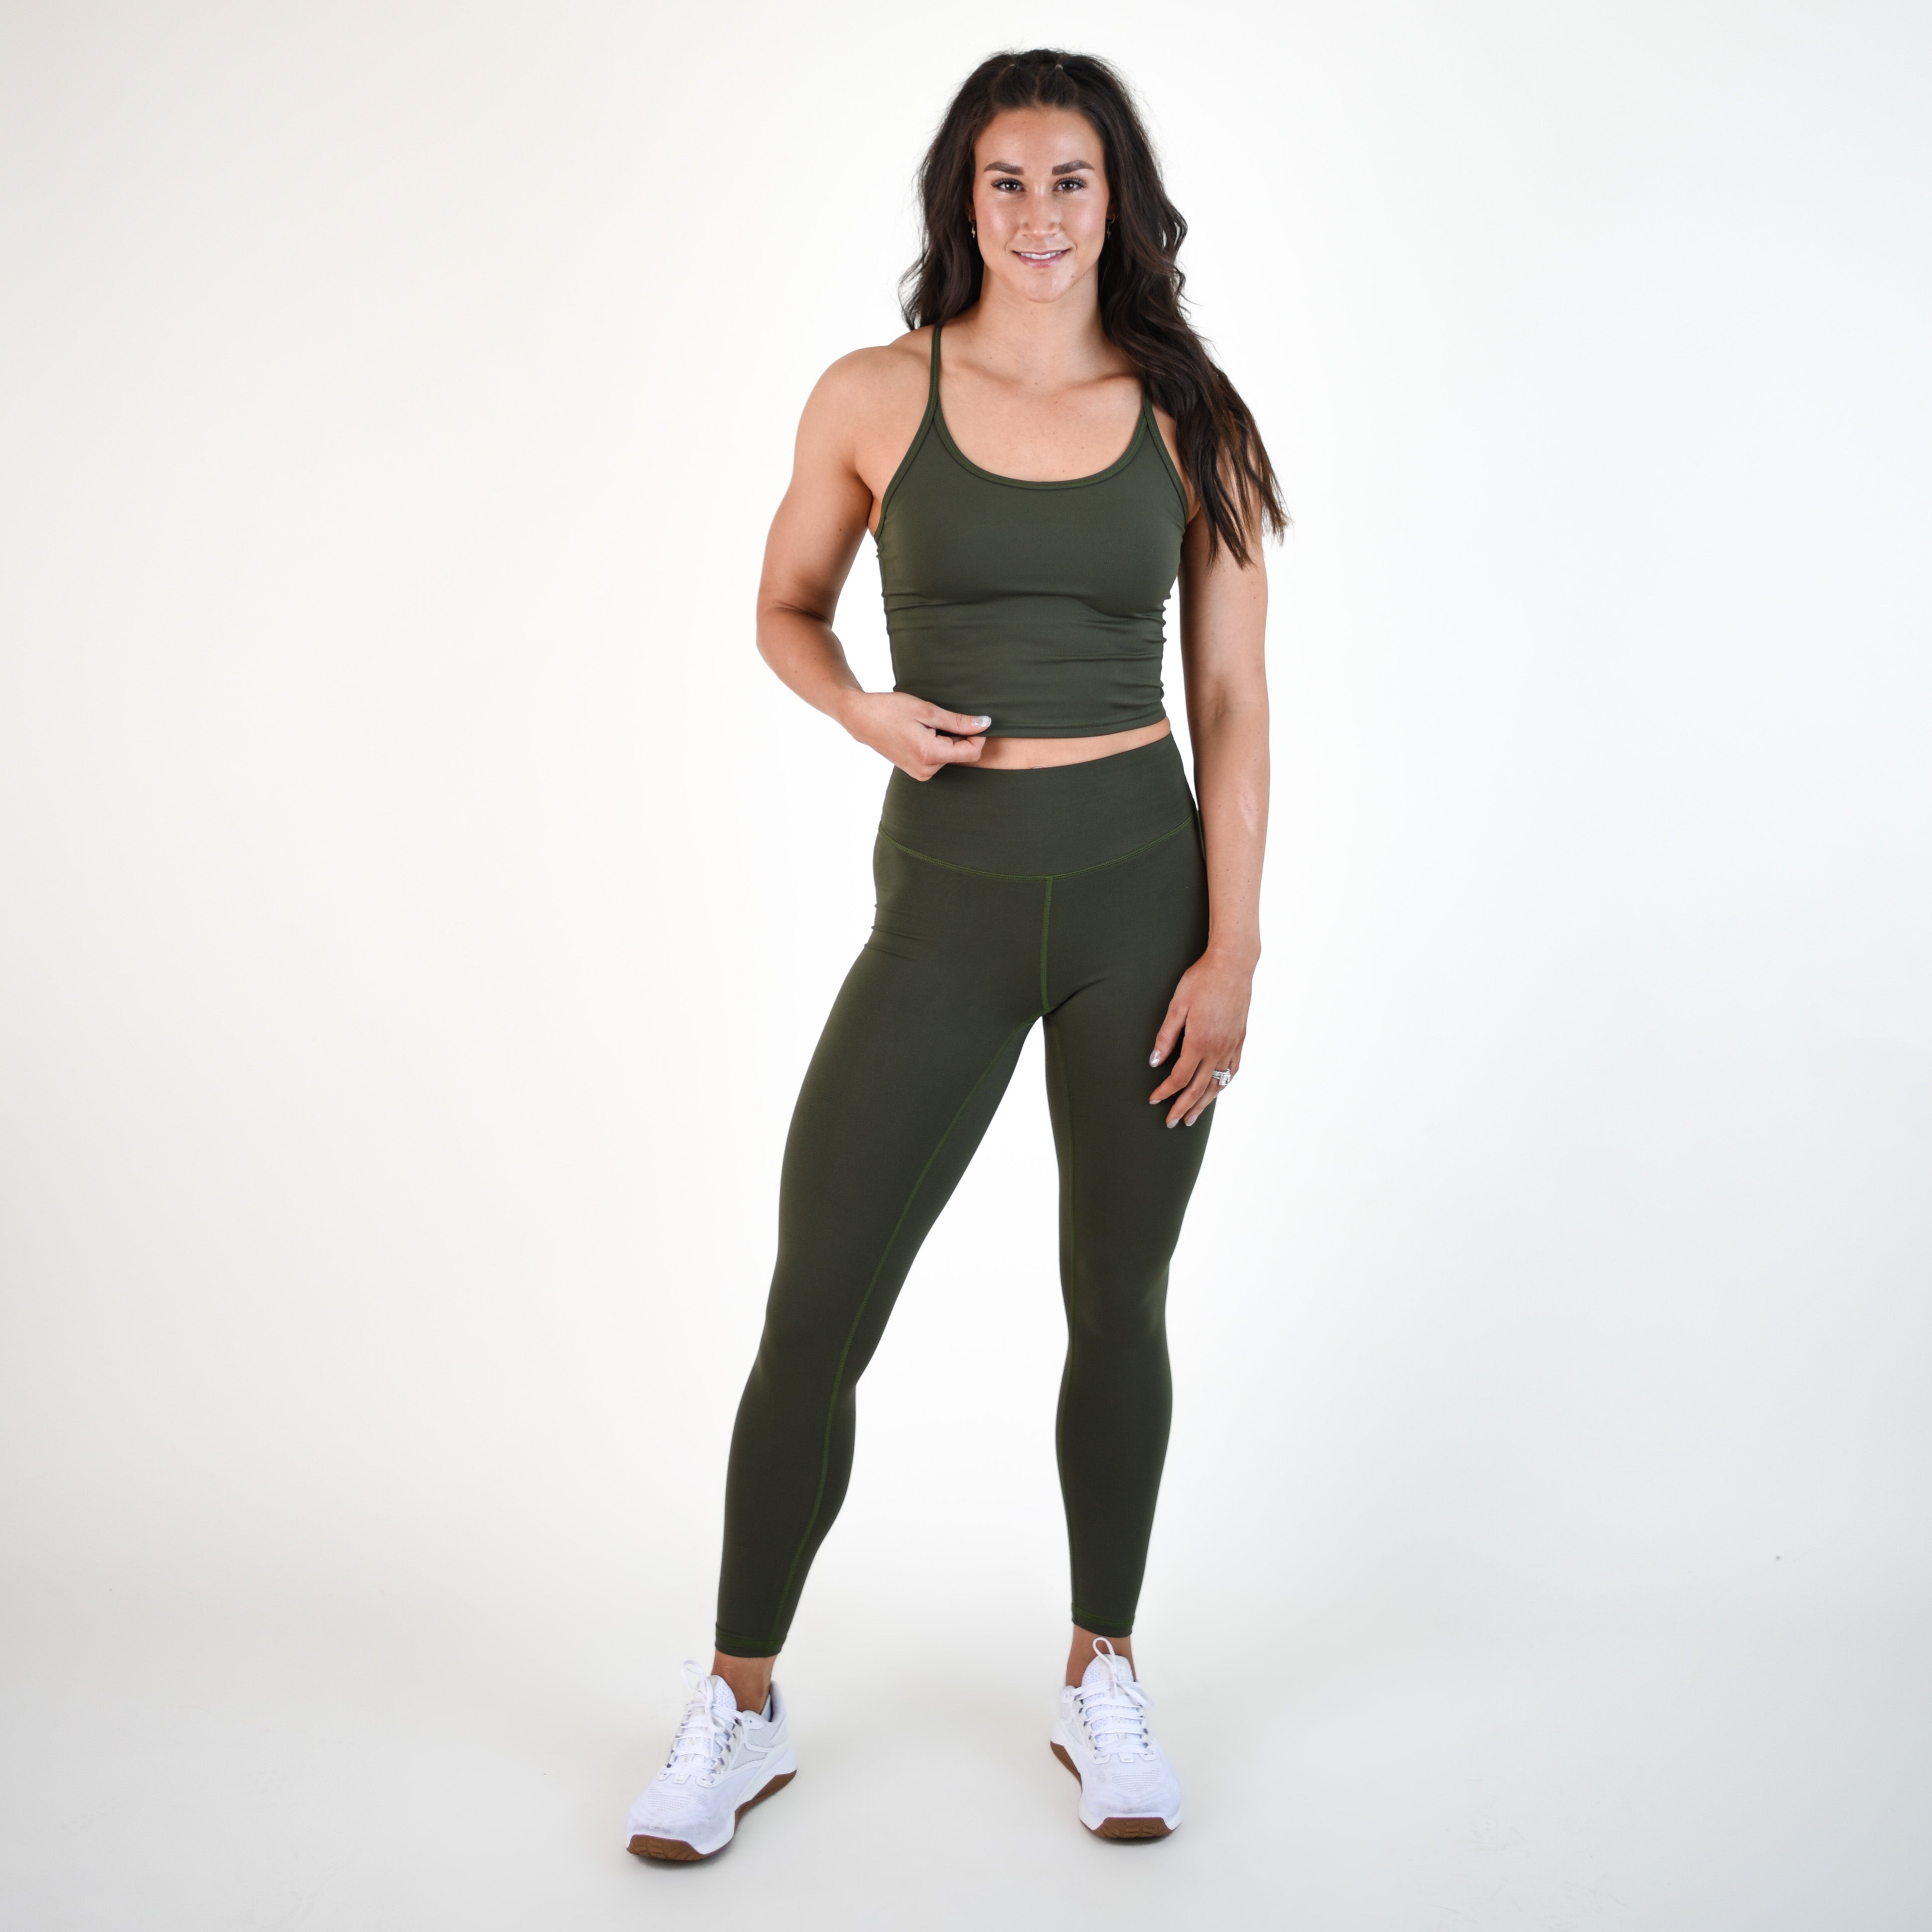 Chive Contoured Workout Legging - Go Go - Curved High Rise